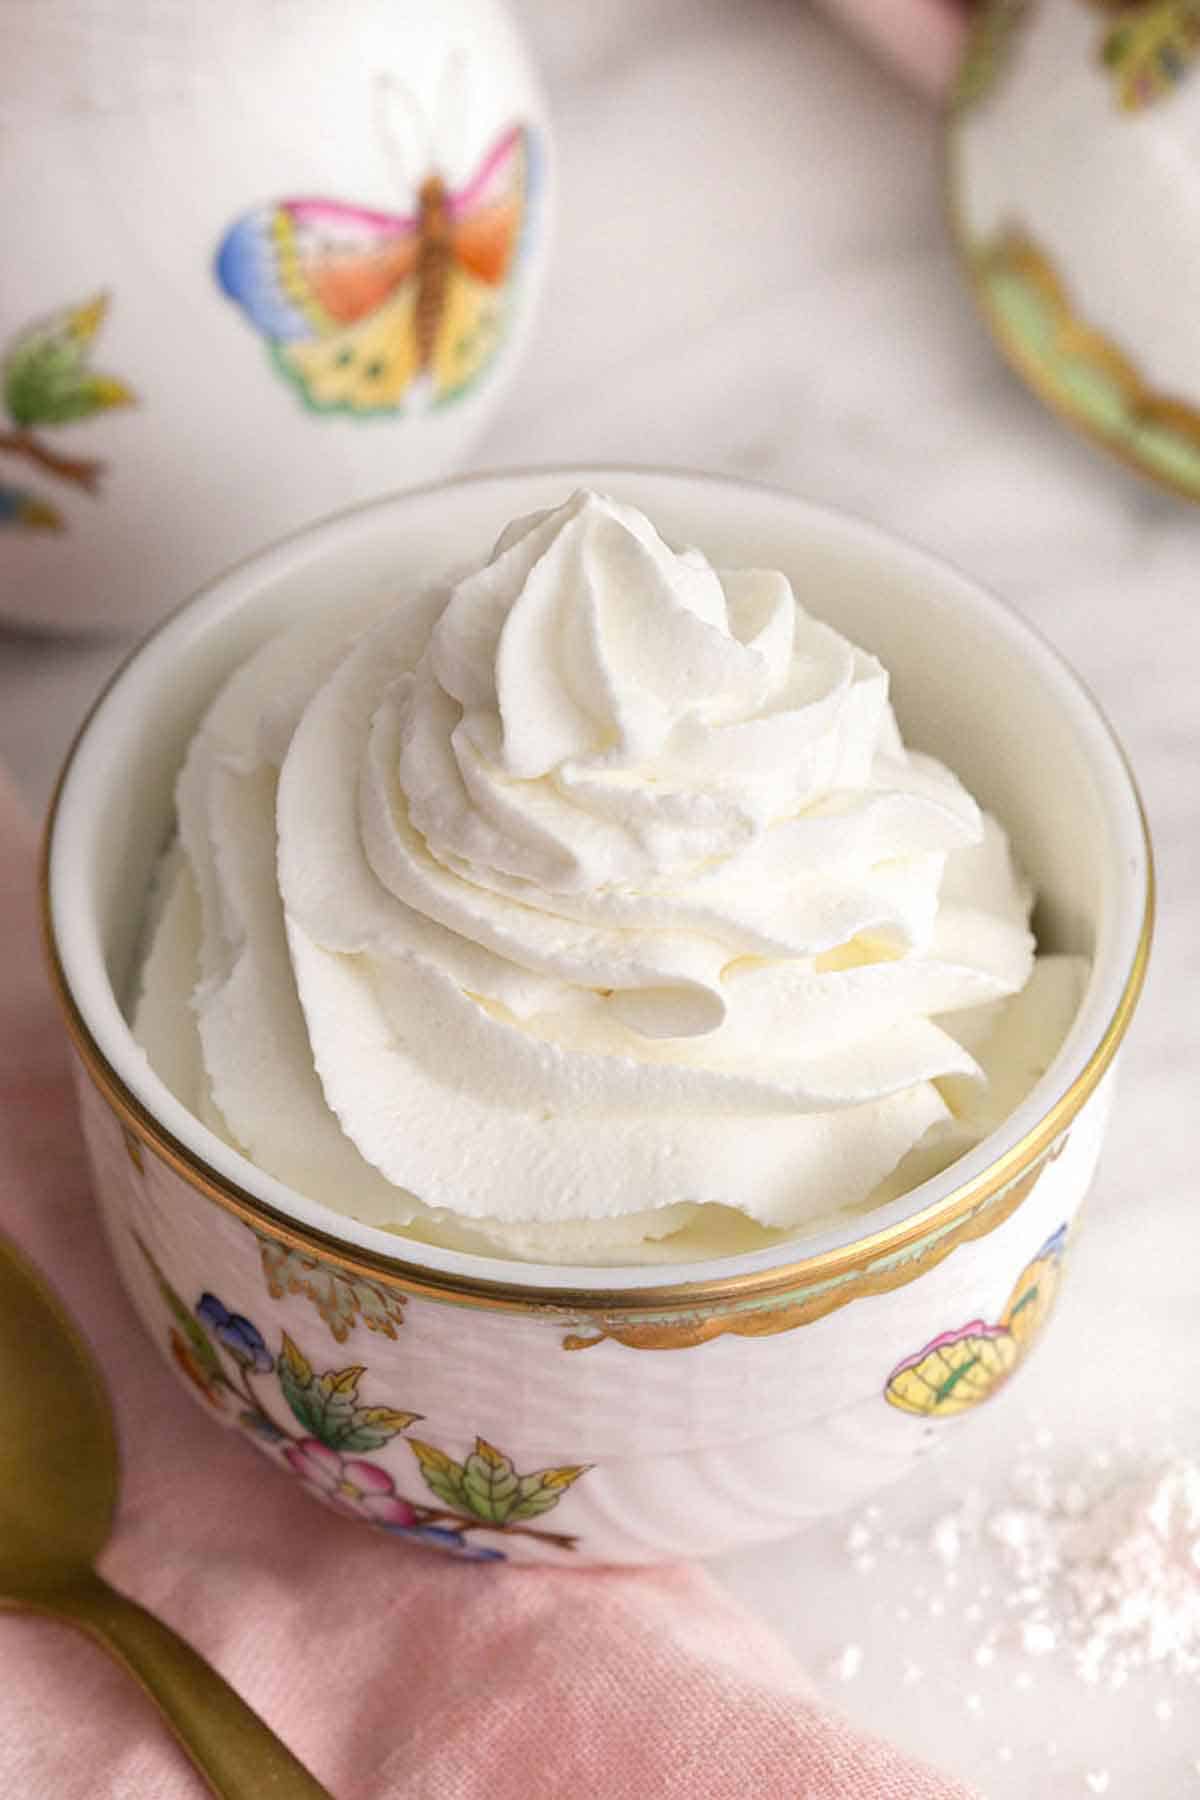 A small bowl of whipped cream.